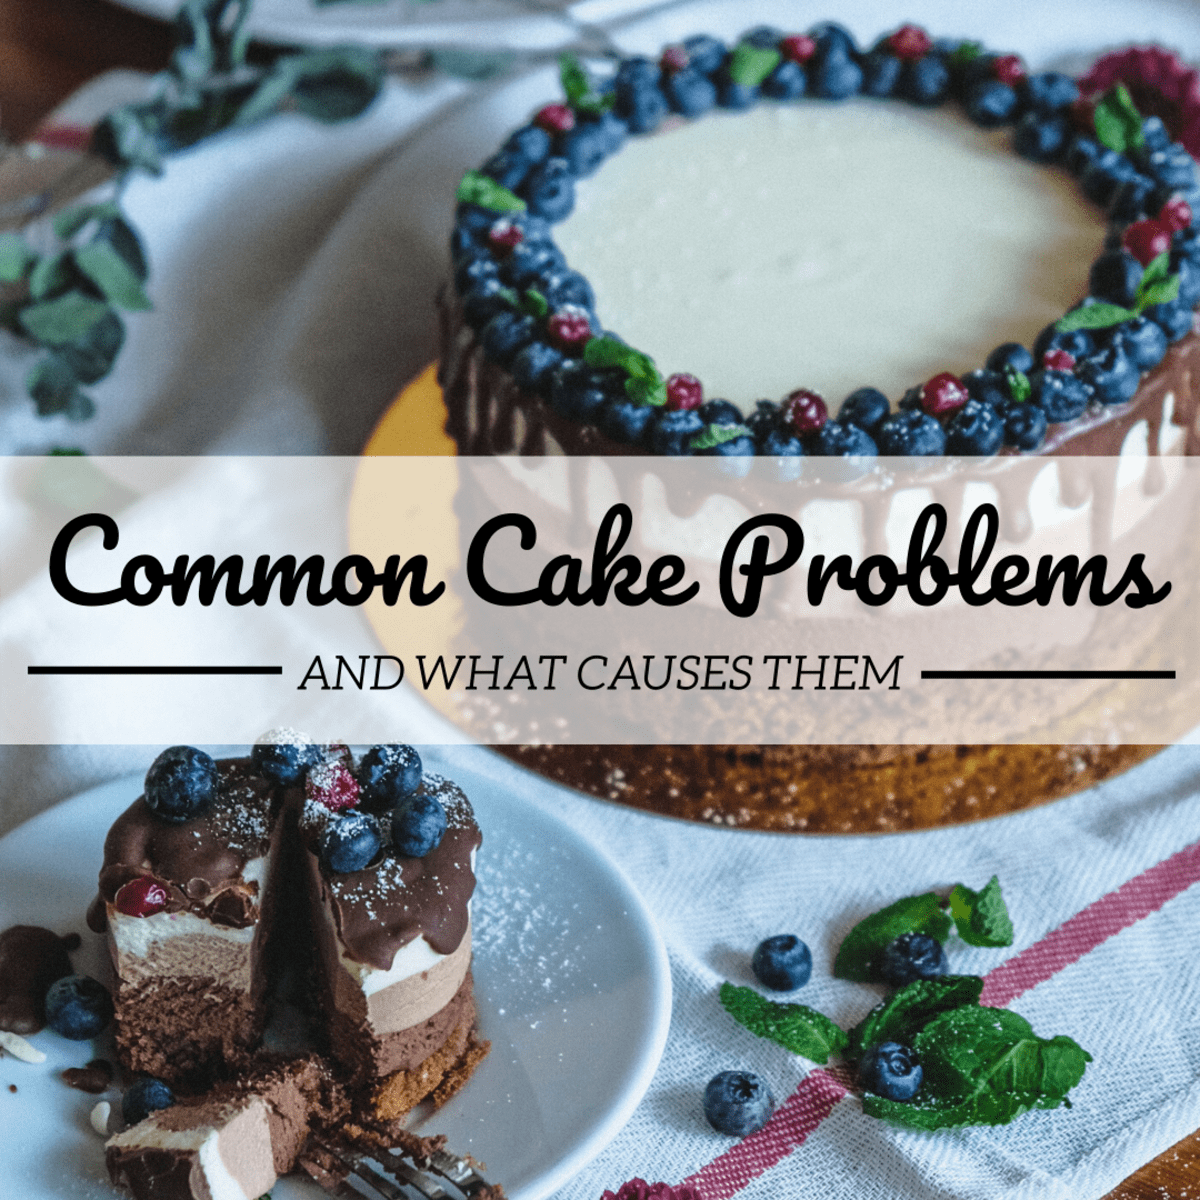 Why does my cake's bottom part get wet after baking? How do I prevent it? -  Quora